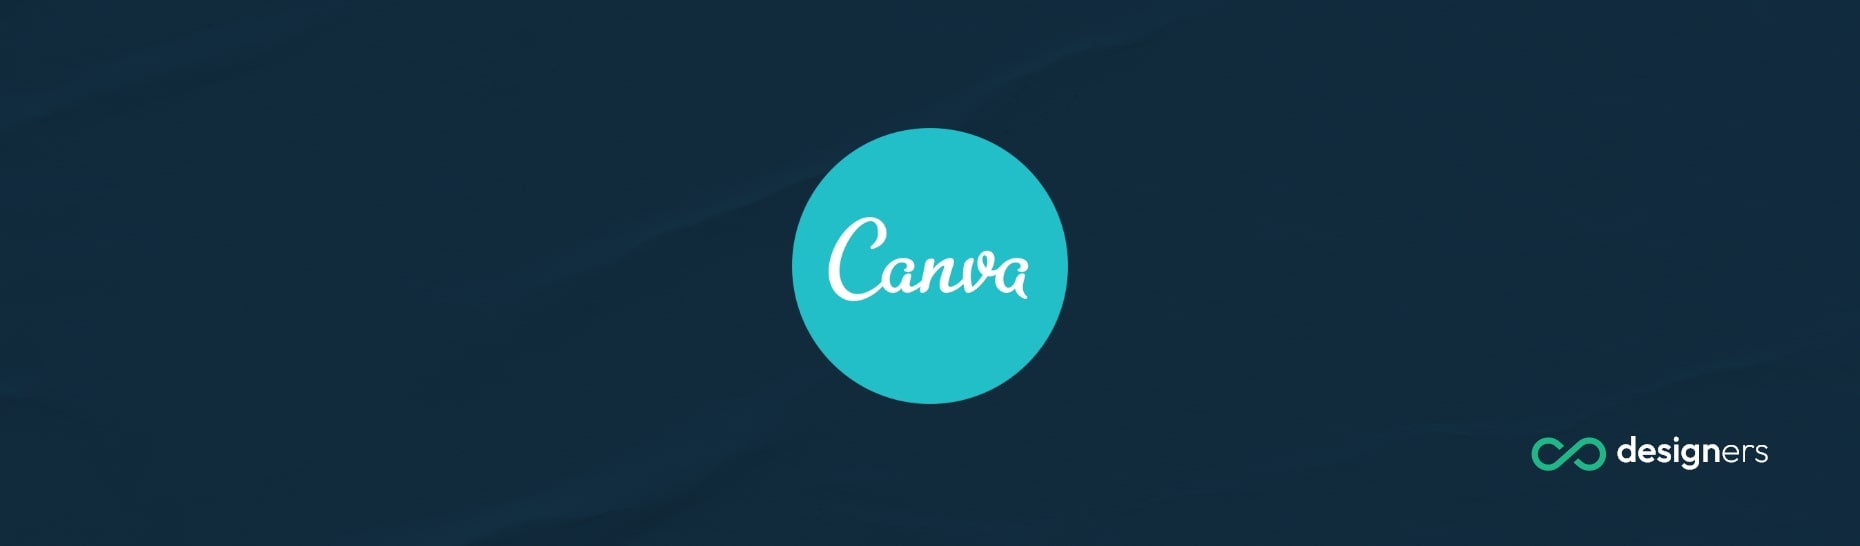 Why Is Canva Blocked?